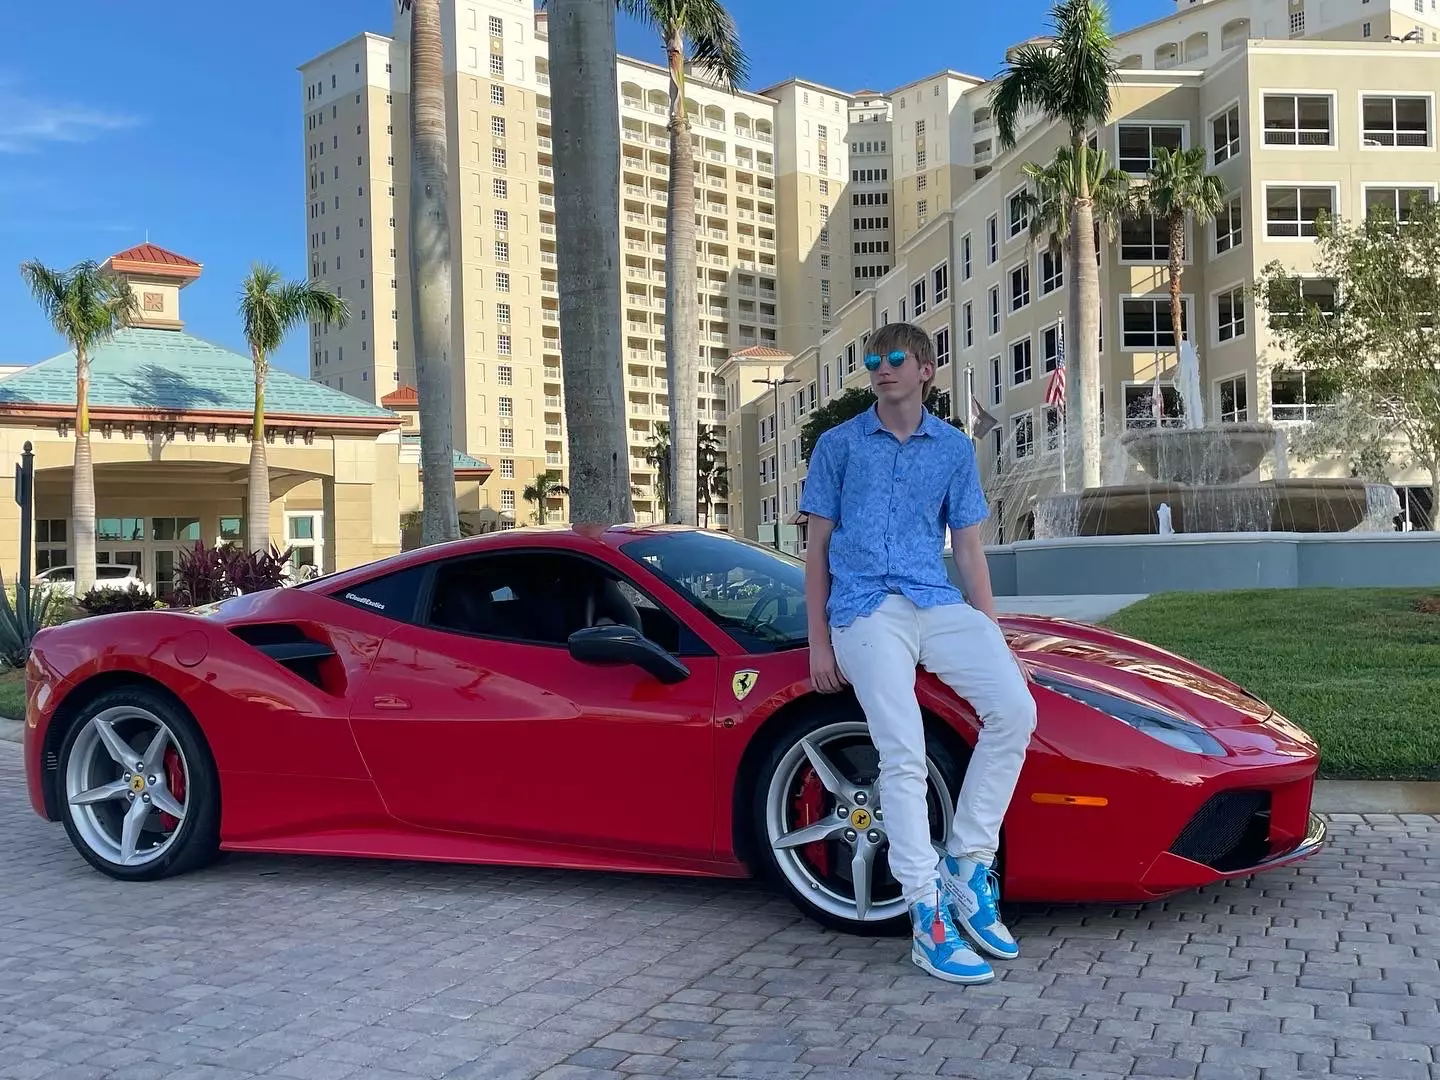 'Self made' Dylan Huntley claims to be the 'youngest private fund manager in America' after becoming a millionaire at the age of 15.